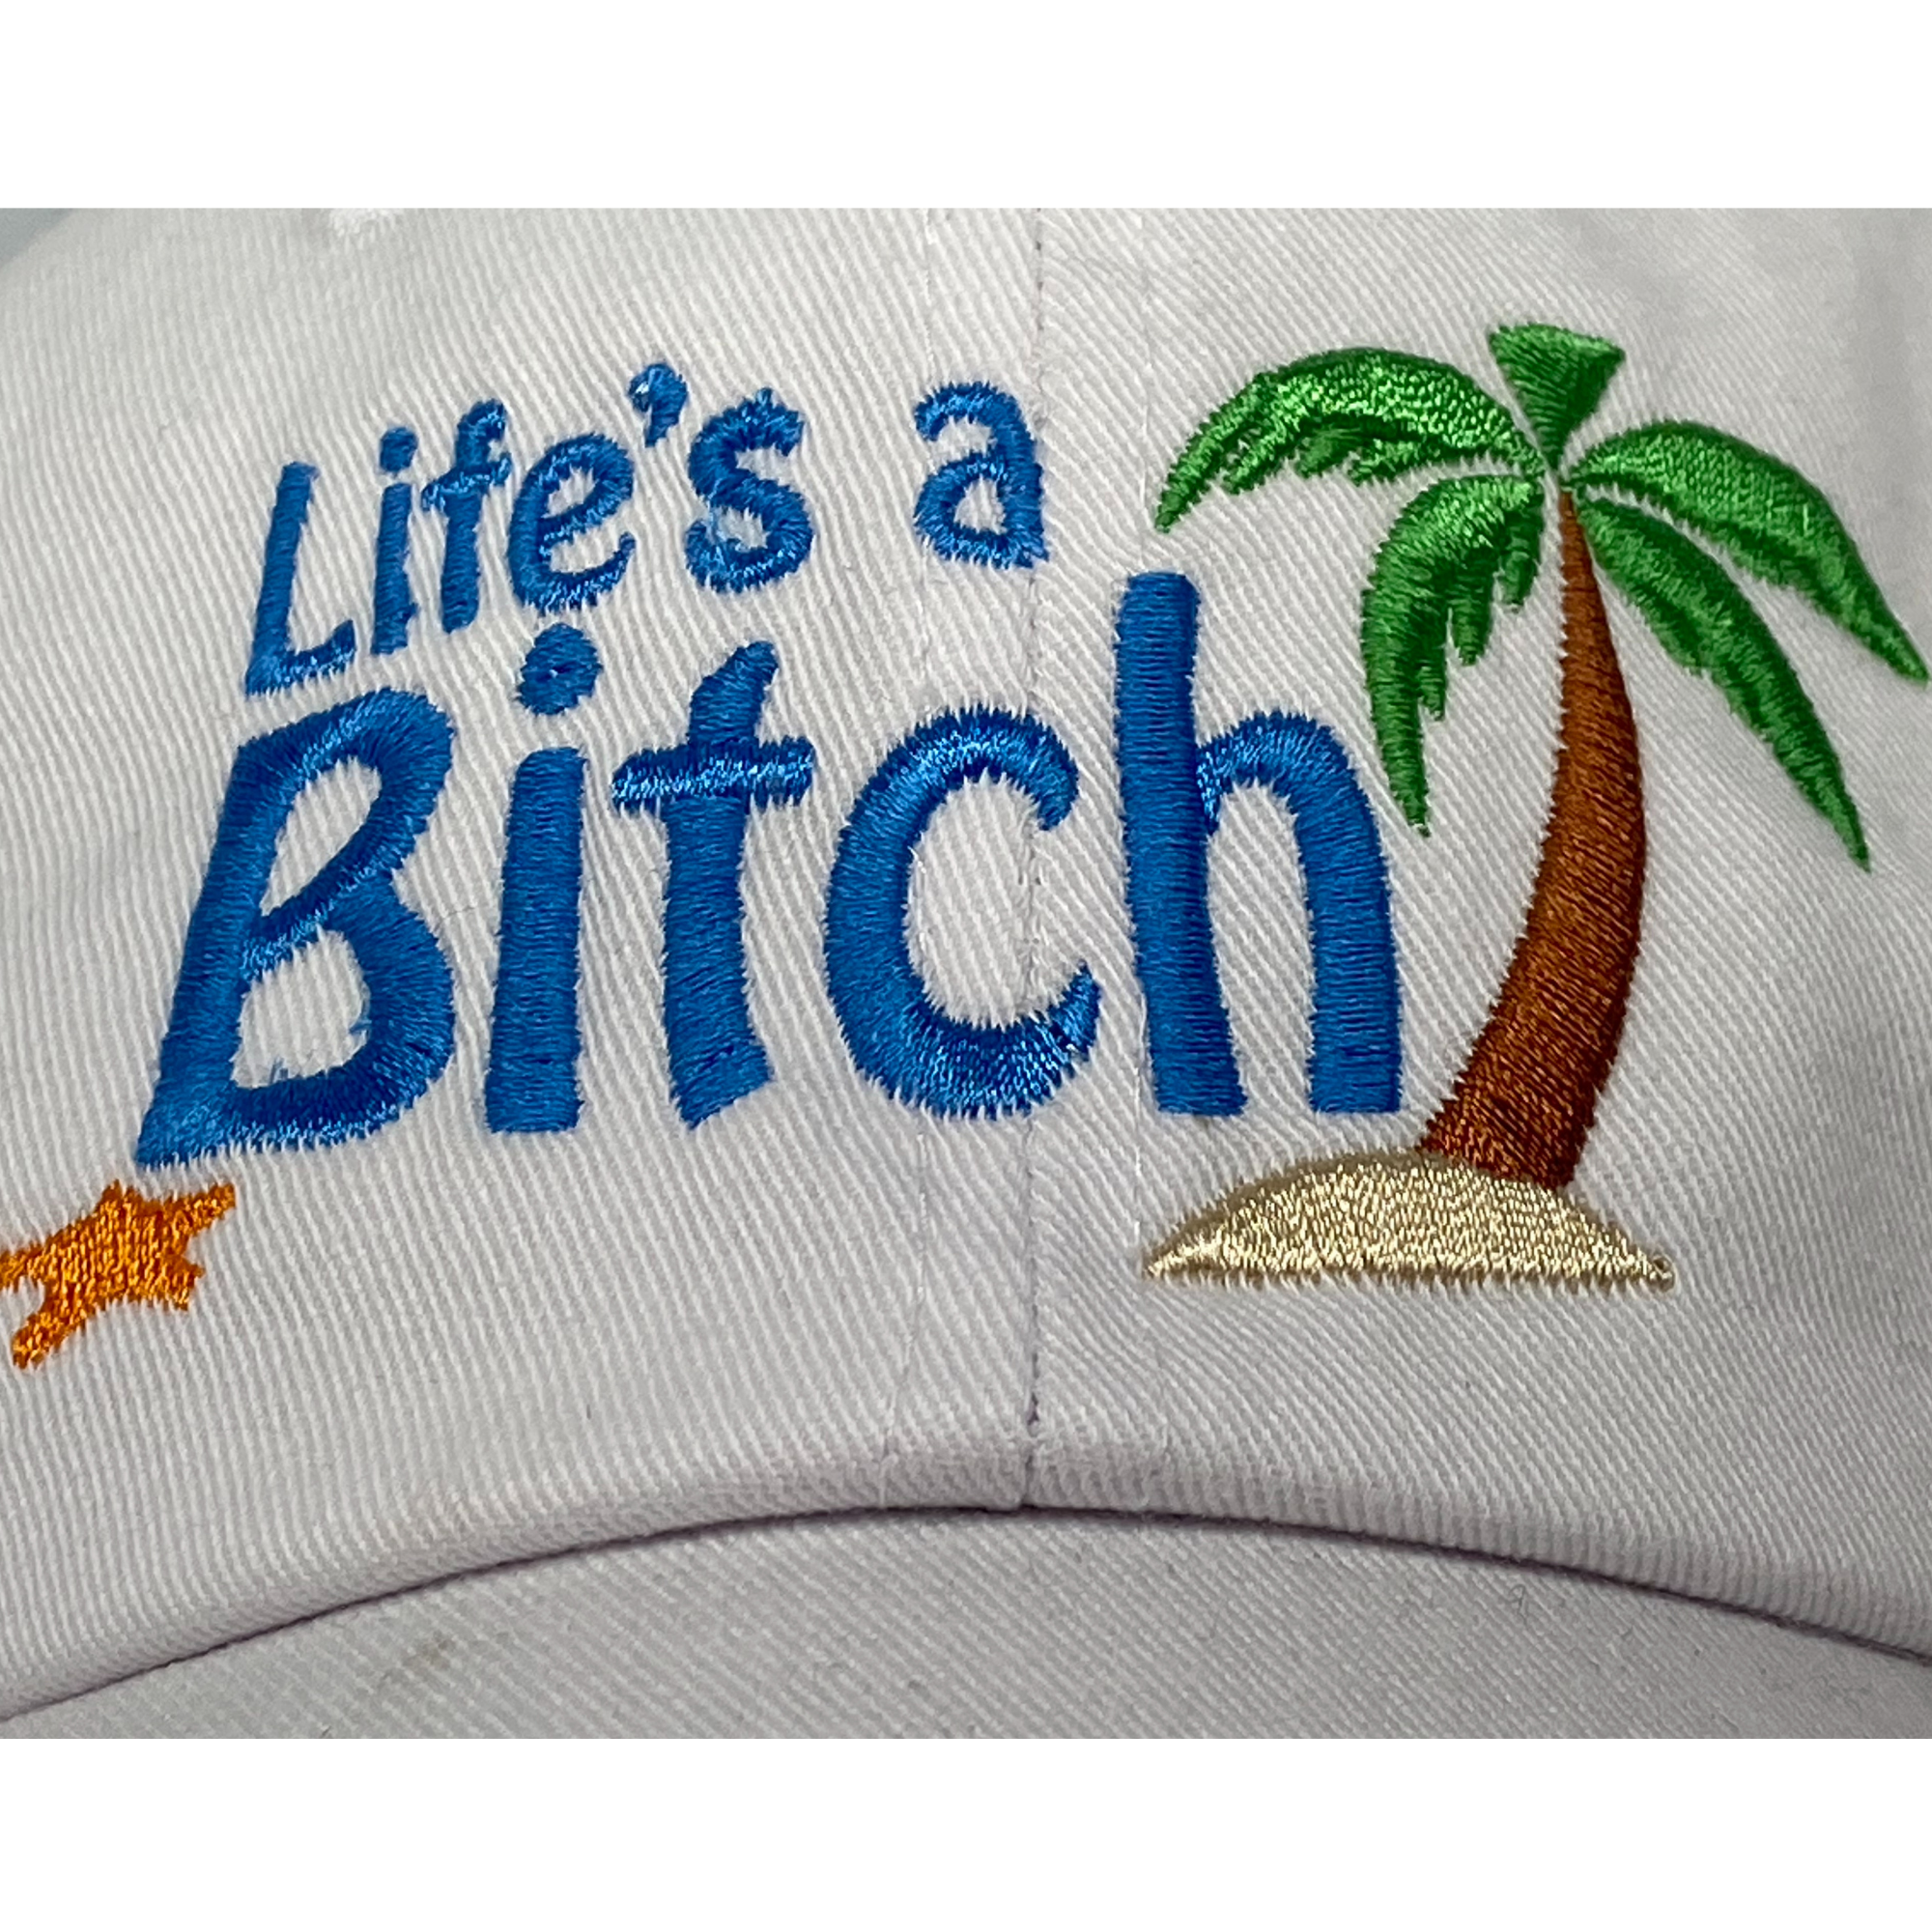 Life's a Bitch Embroidered White Dad Hat, One Size Fits All